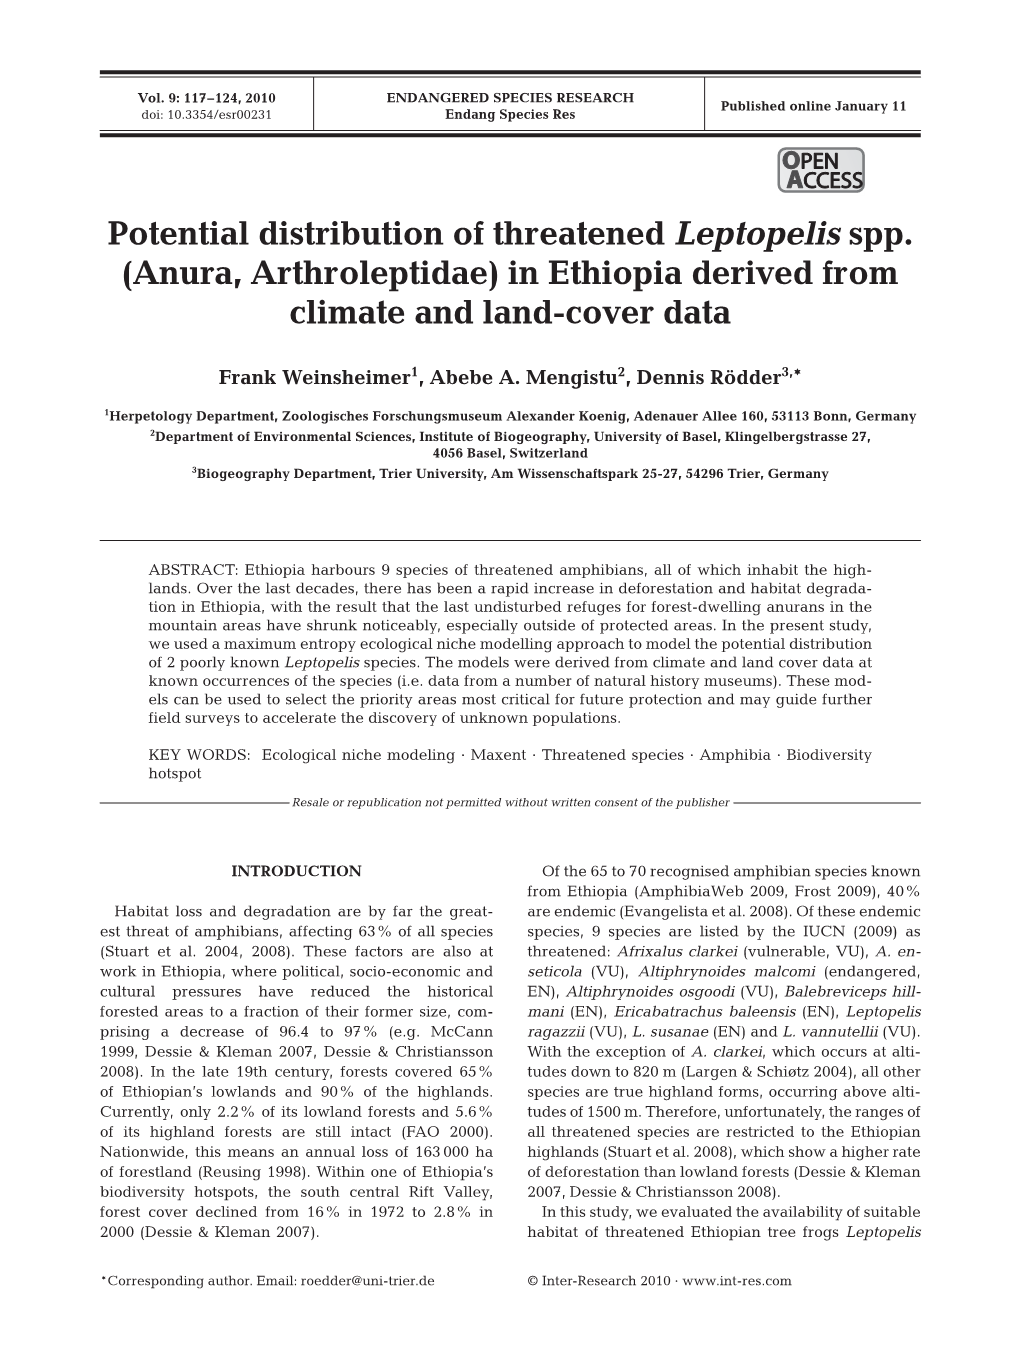 Potential Distribution of Threatened Leptopelis Spp. (Anura, Arthroleptidae) in Ethiopia Derived from Climate and Land-Cover Data